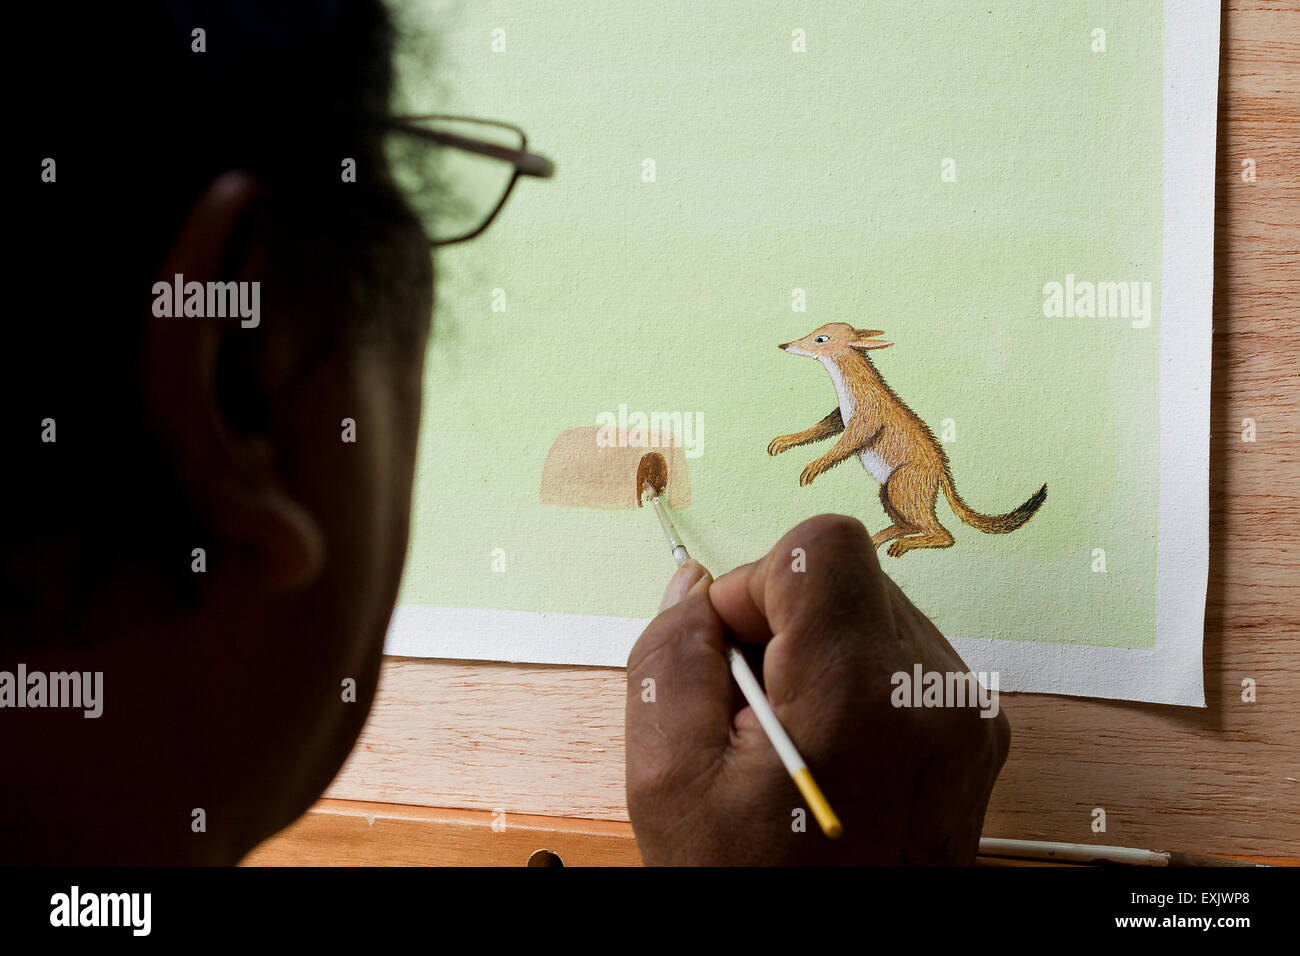 Man painting animal character on paper Stock Photo